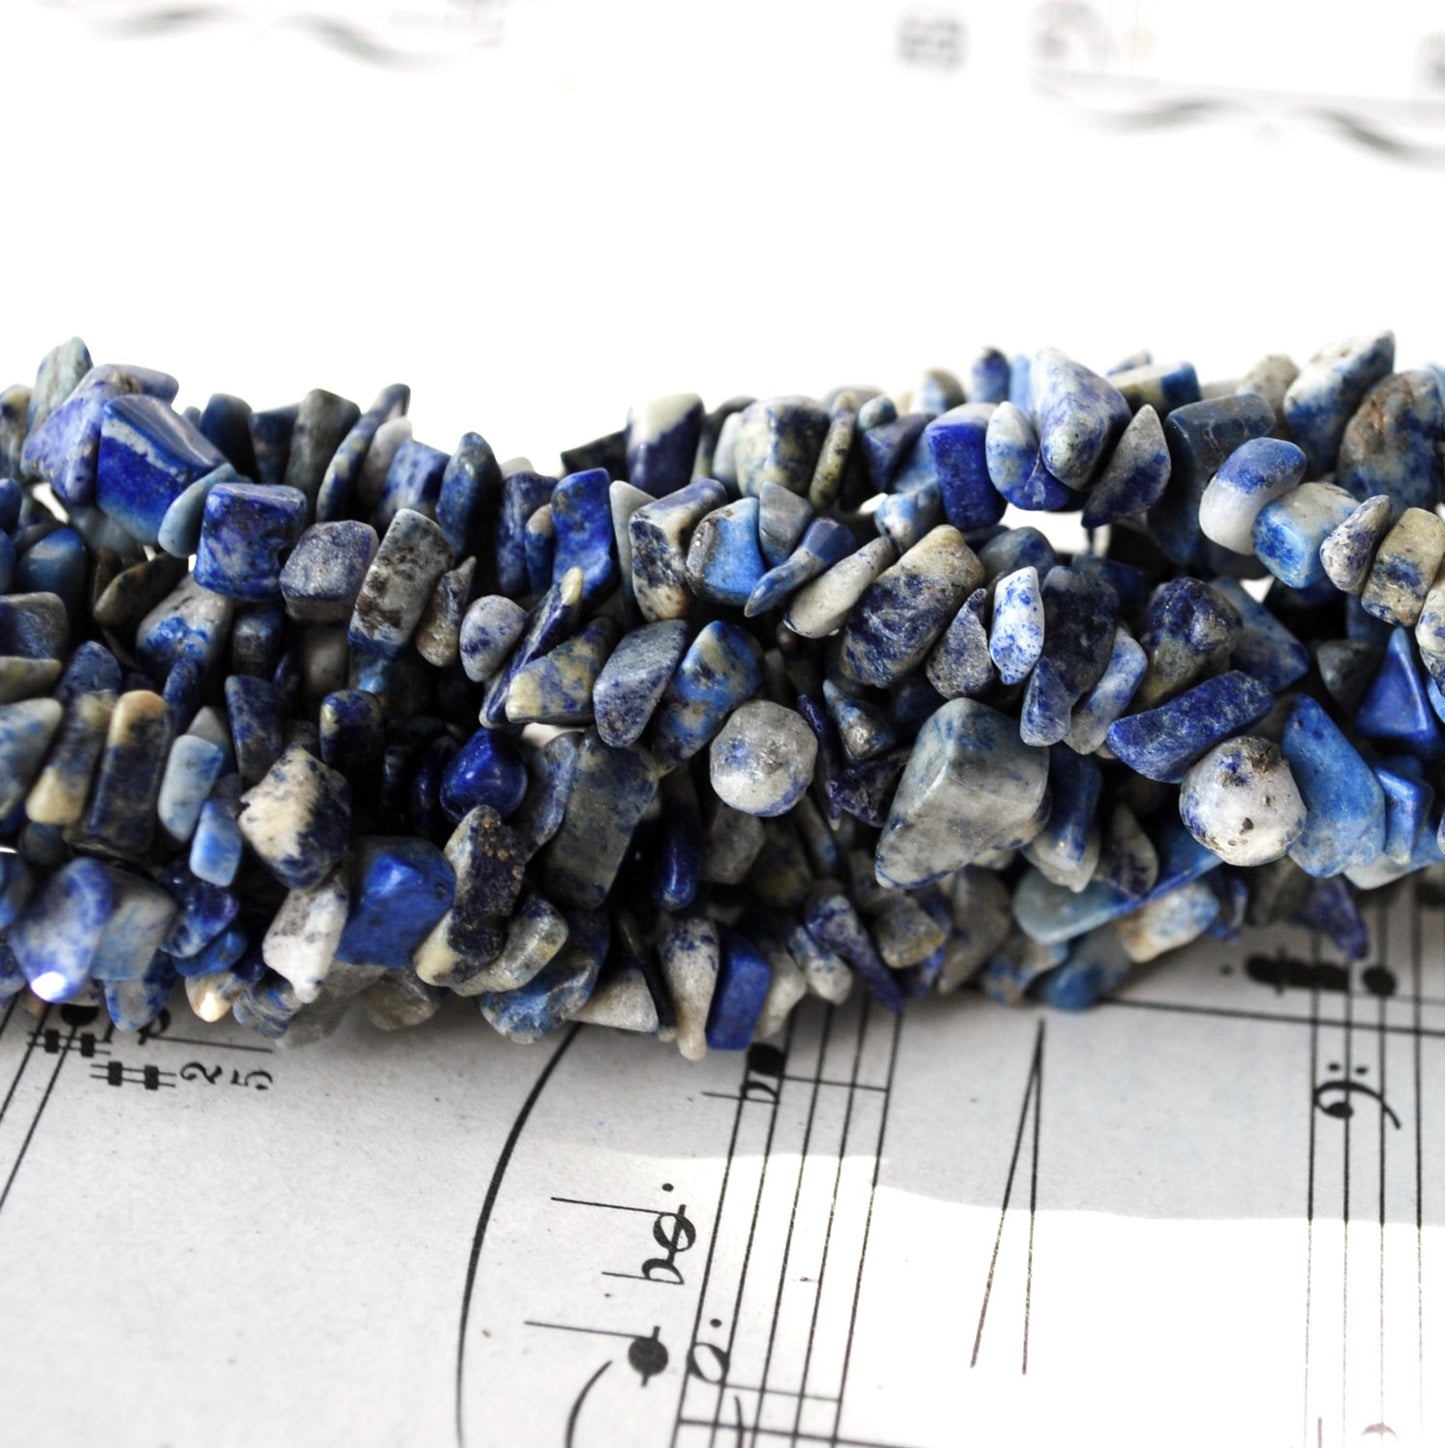 35" Lapis Chip Beads, Denim Lapis Lazuli Medium Small Polished Chips and Nuggets in Blue White and Grey, Gemstone Bulk Lot for Jewelrymaking